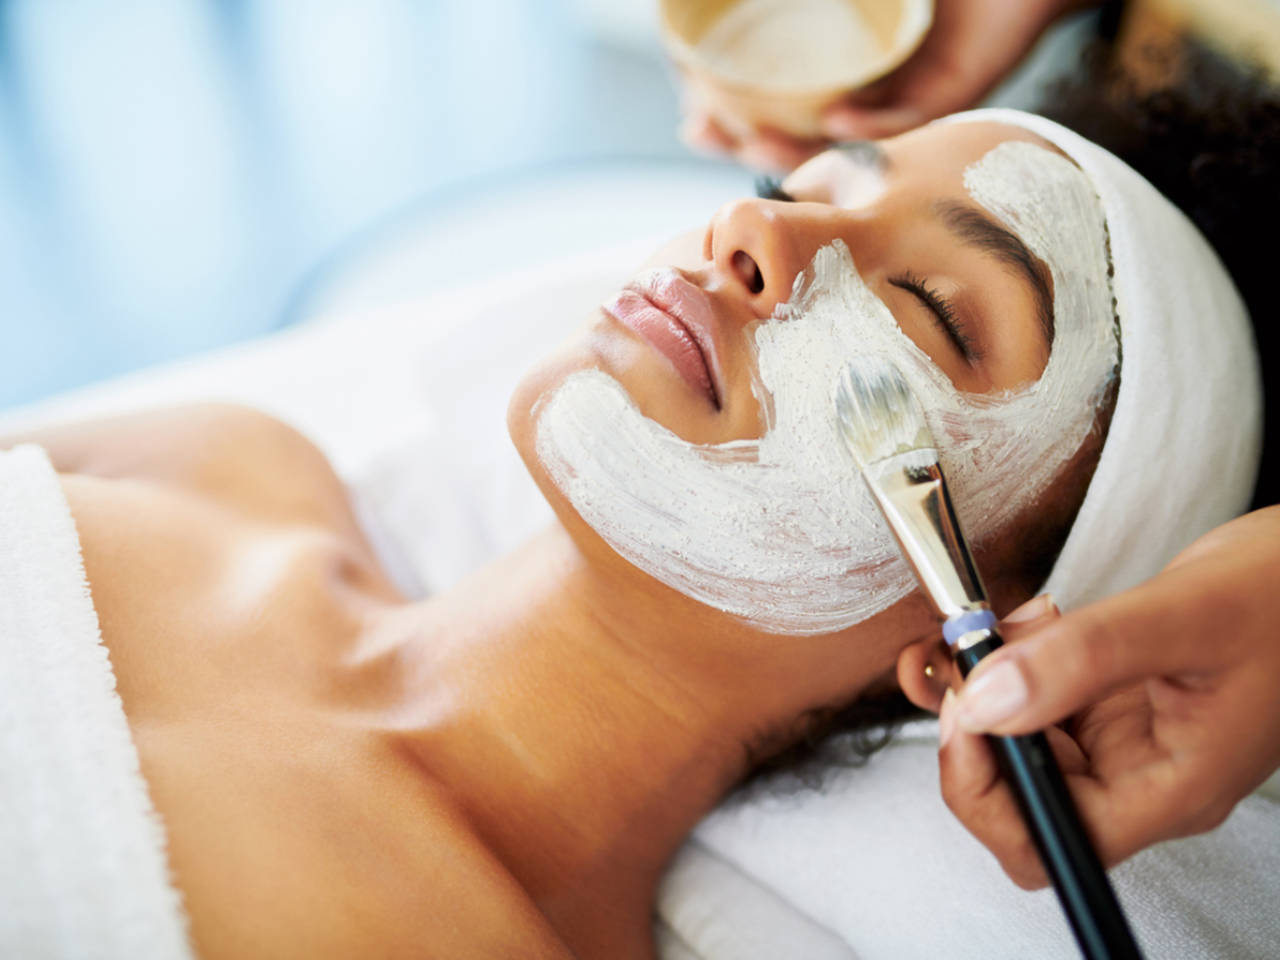 Things to keep in mind before and after a chemical peel pic